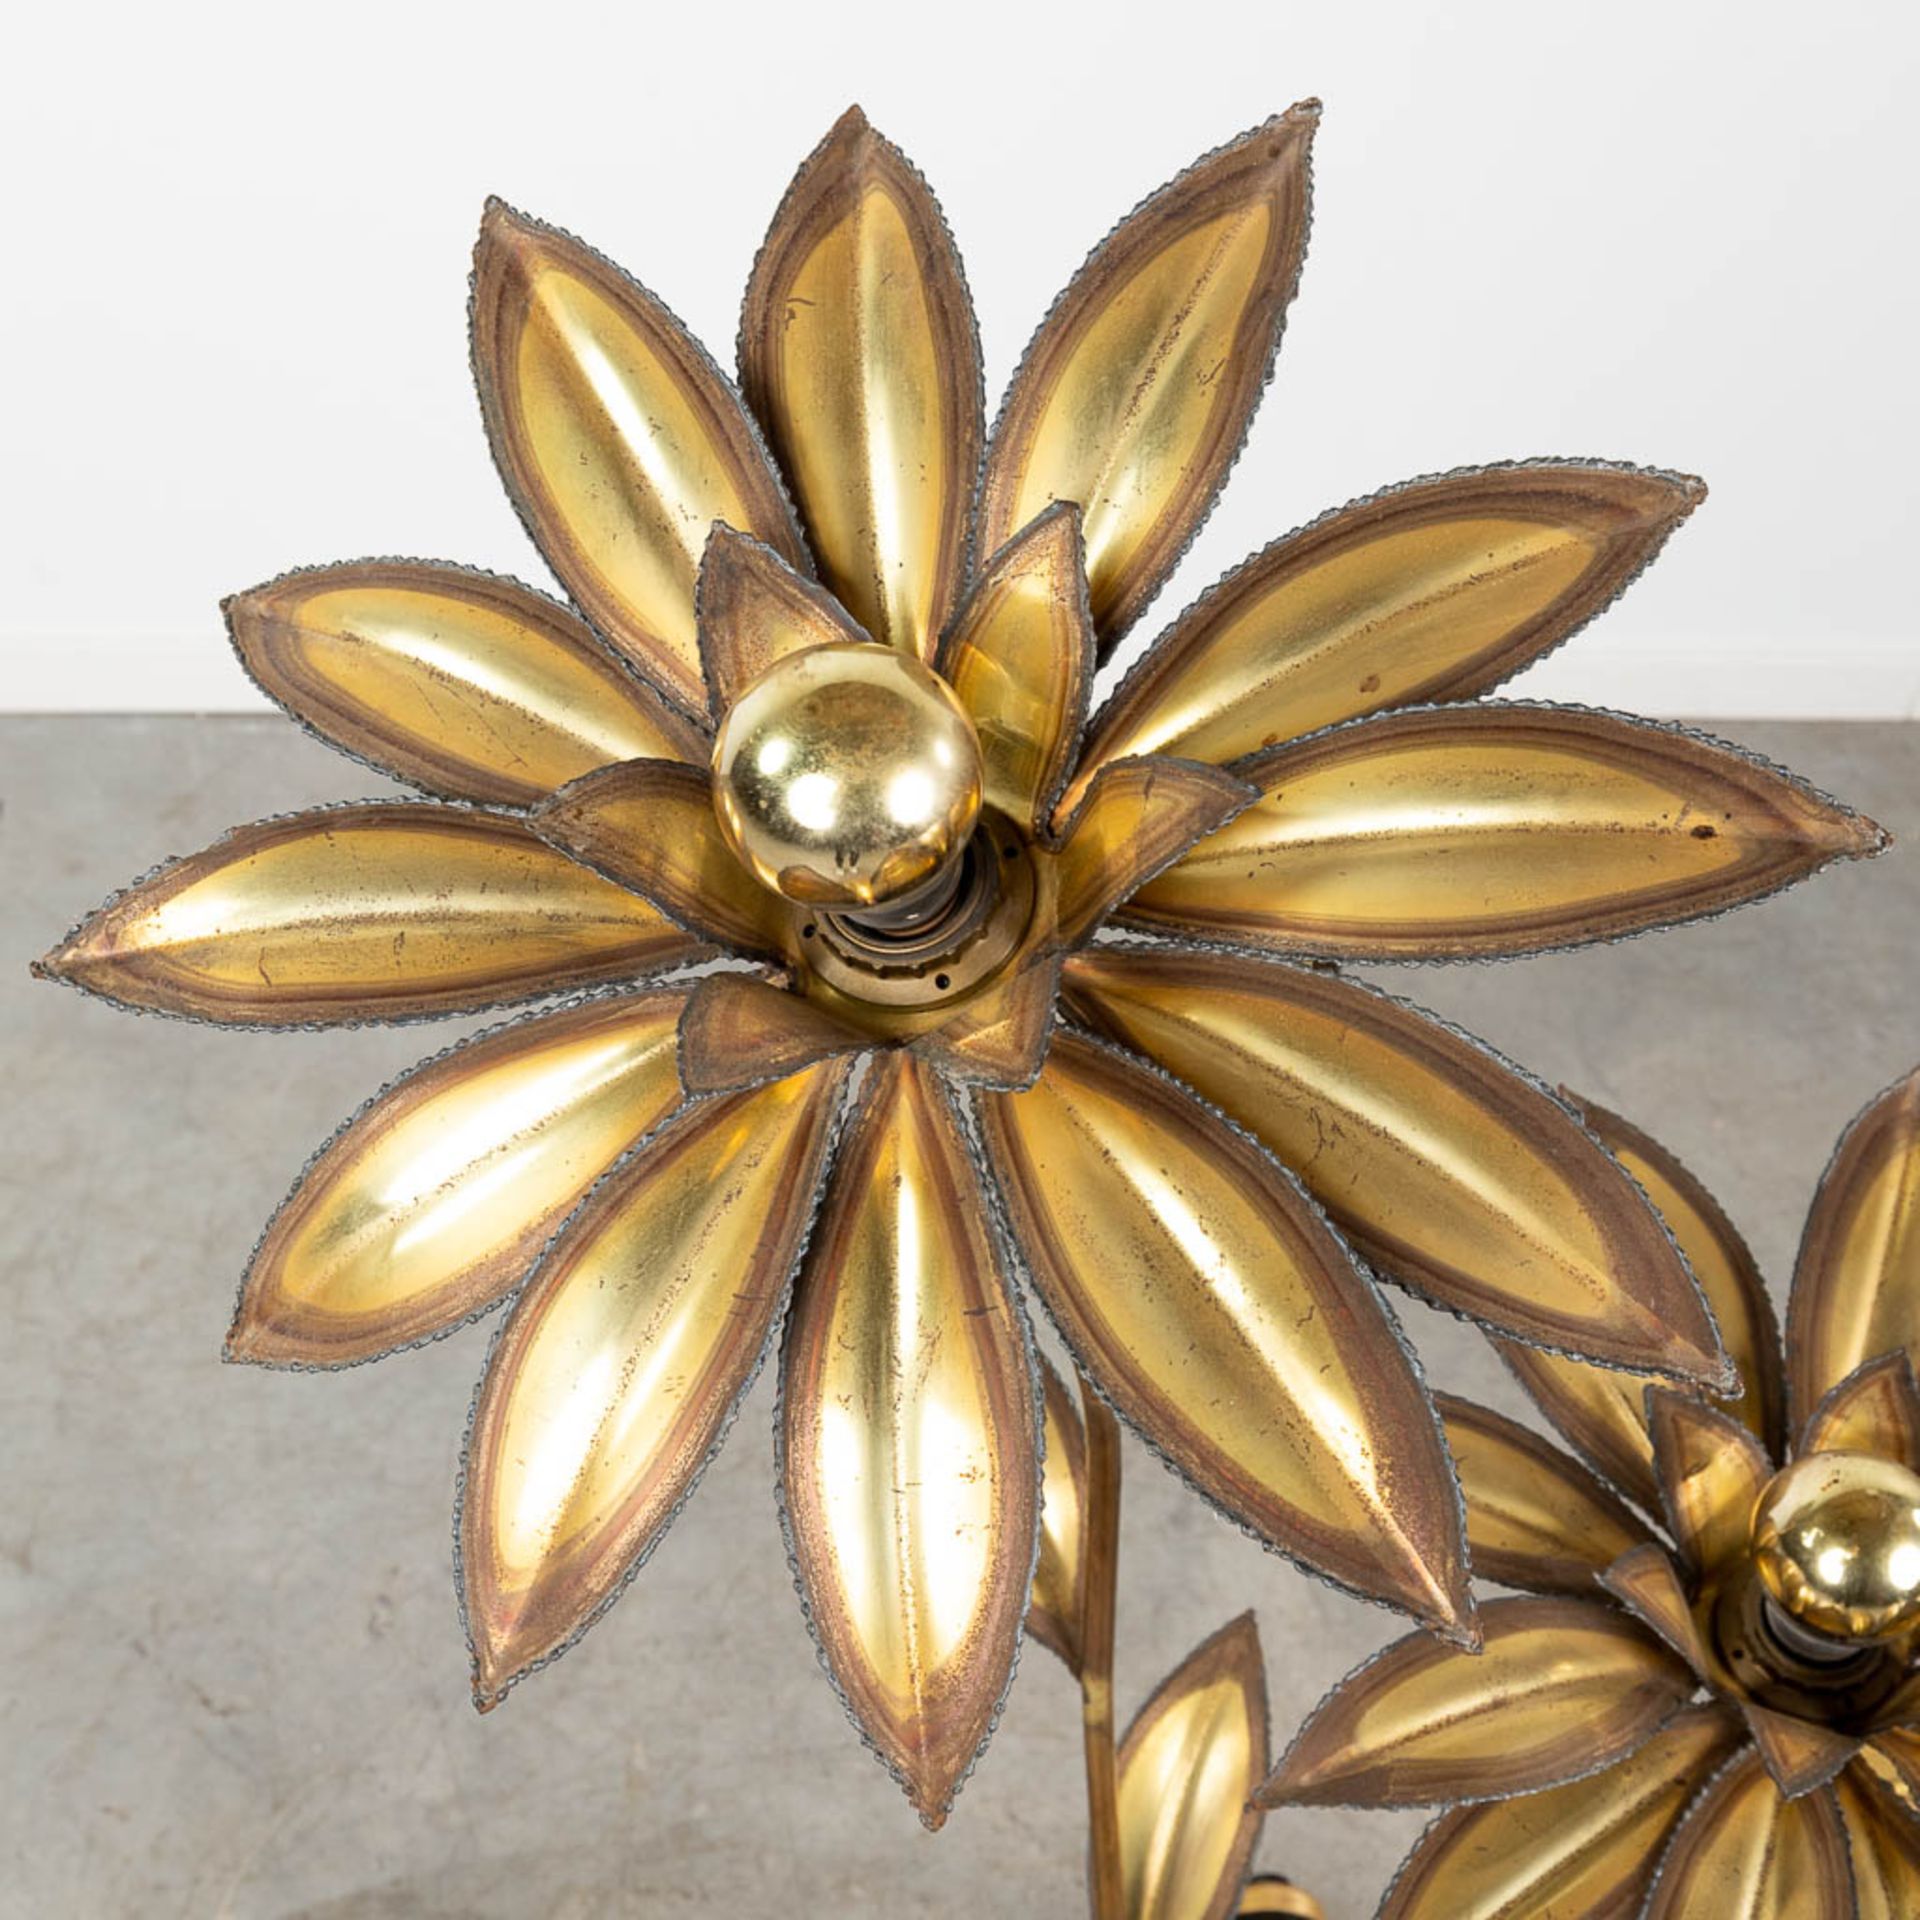 Maison Janssen, a table lamp made of metal flowers. (L:57 x W:68 x H:112 cm) - Image 10 of 15